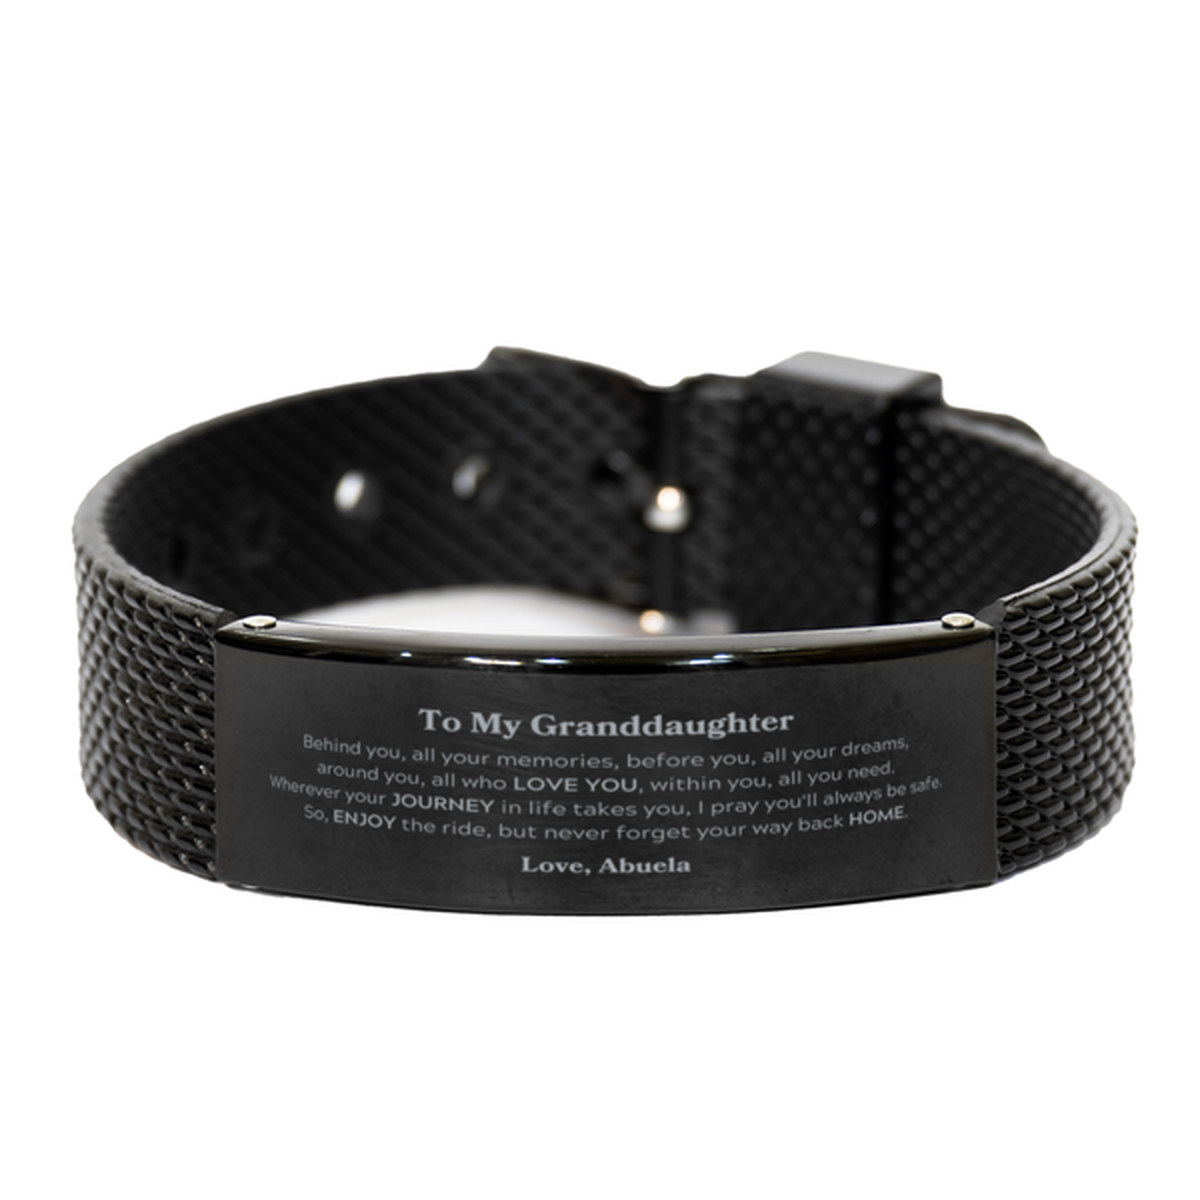 To My Granddaughter Graduation Gifts from Abuela, Granddaughter Black Shark Mesh Bracelet Christmas Birthday Gifts for Granddaughter Behind you, all your memories, before you, all your dreams. Love, Abuela